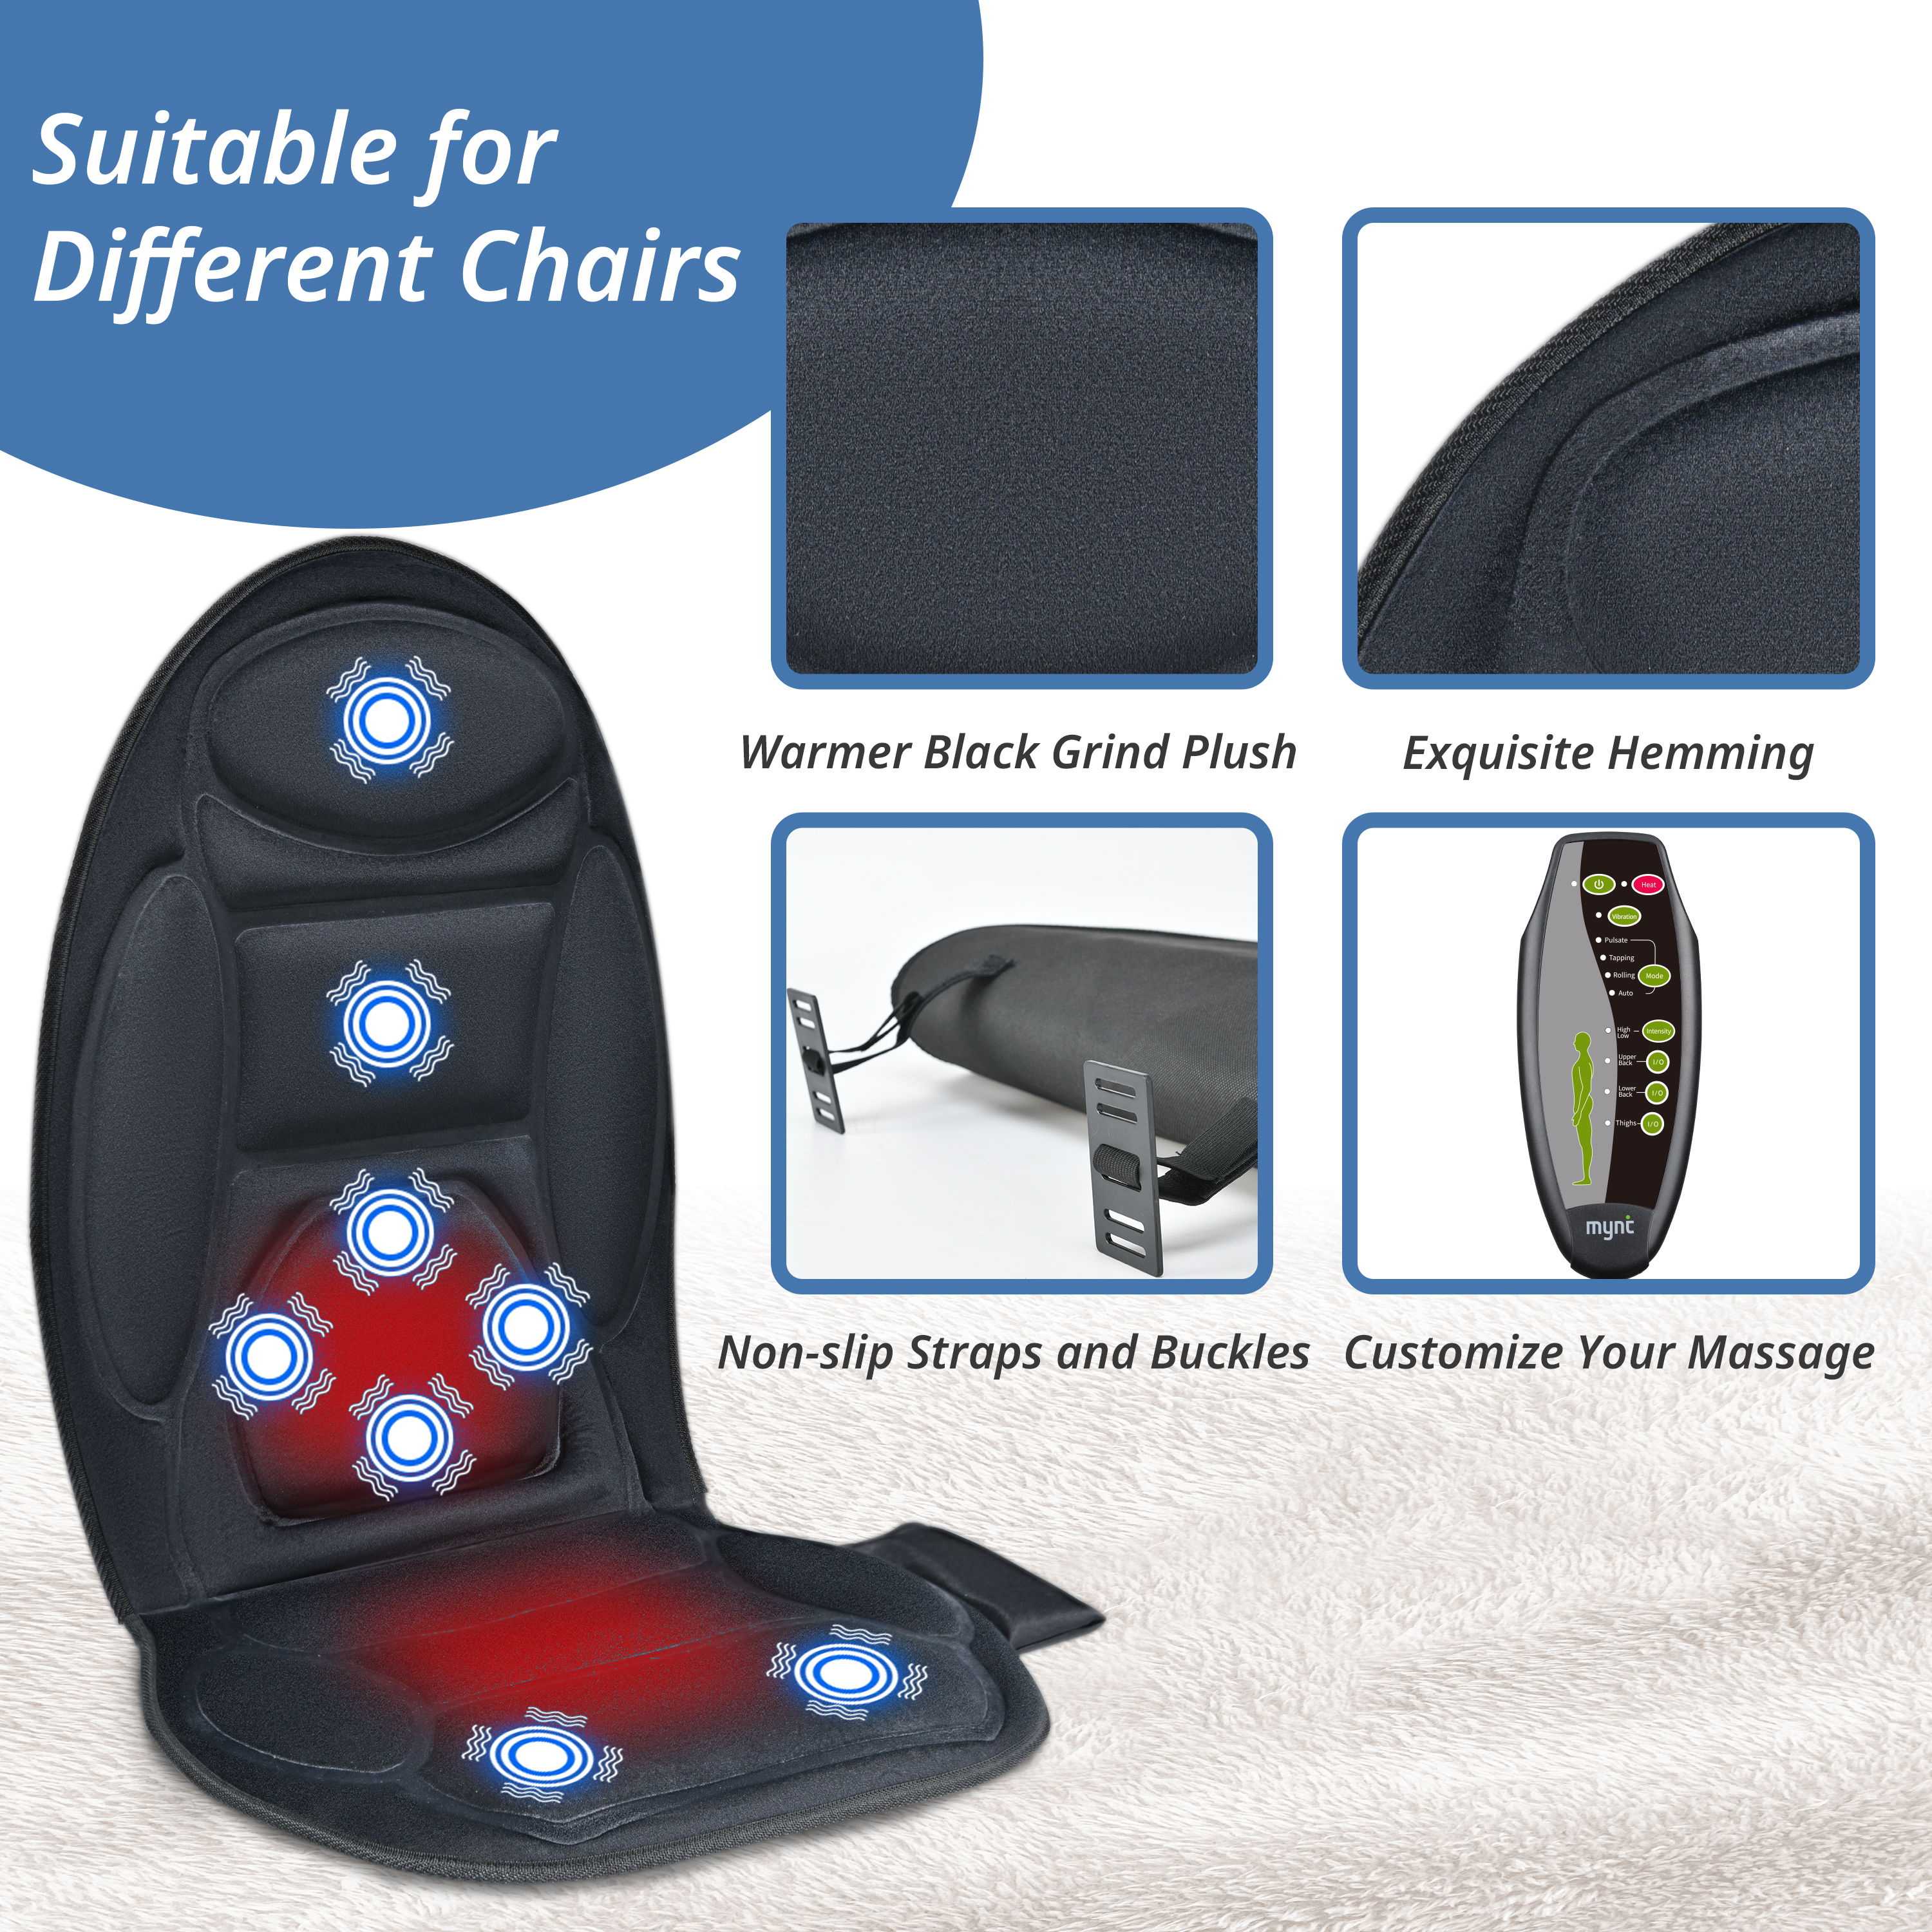 Memory Foam Back Massage Seat: Chair Seat Massager with 8 Vibration Massage Nodes, Massage Chair Pad for Home Office Chair(Black)